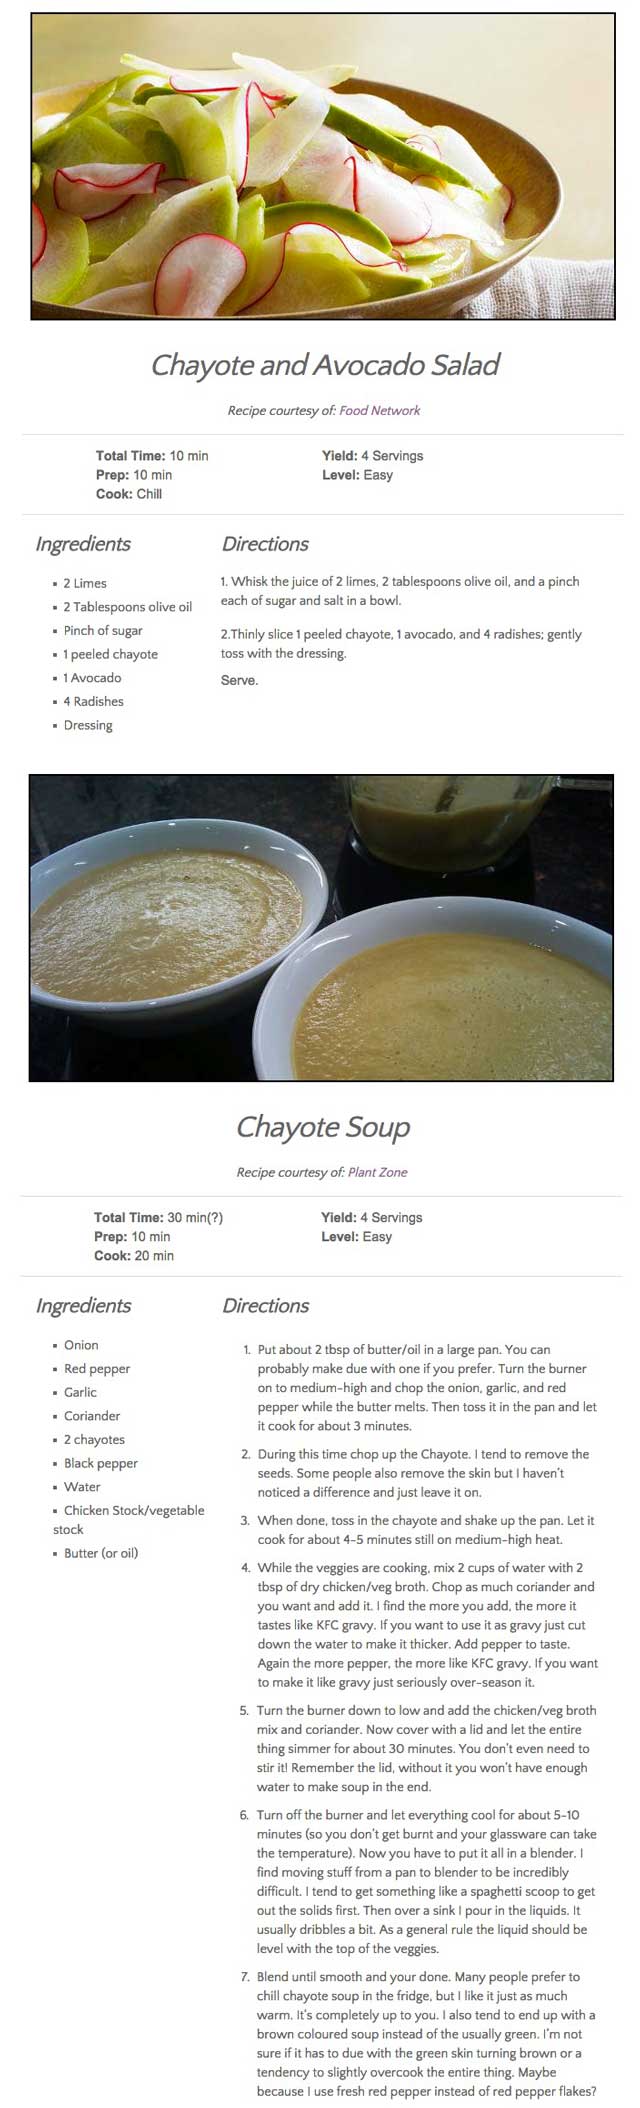 Chayote recipes, One Community